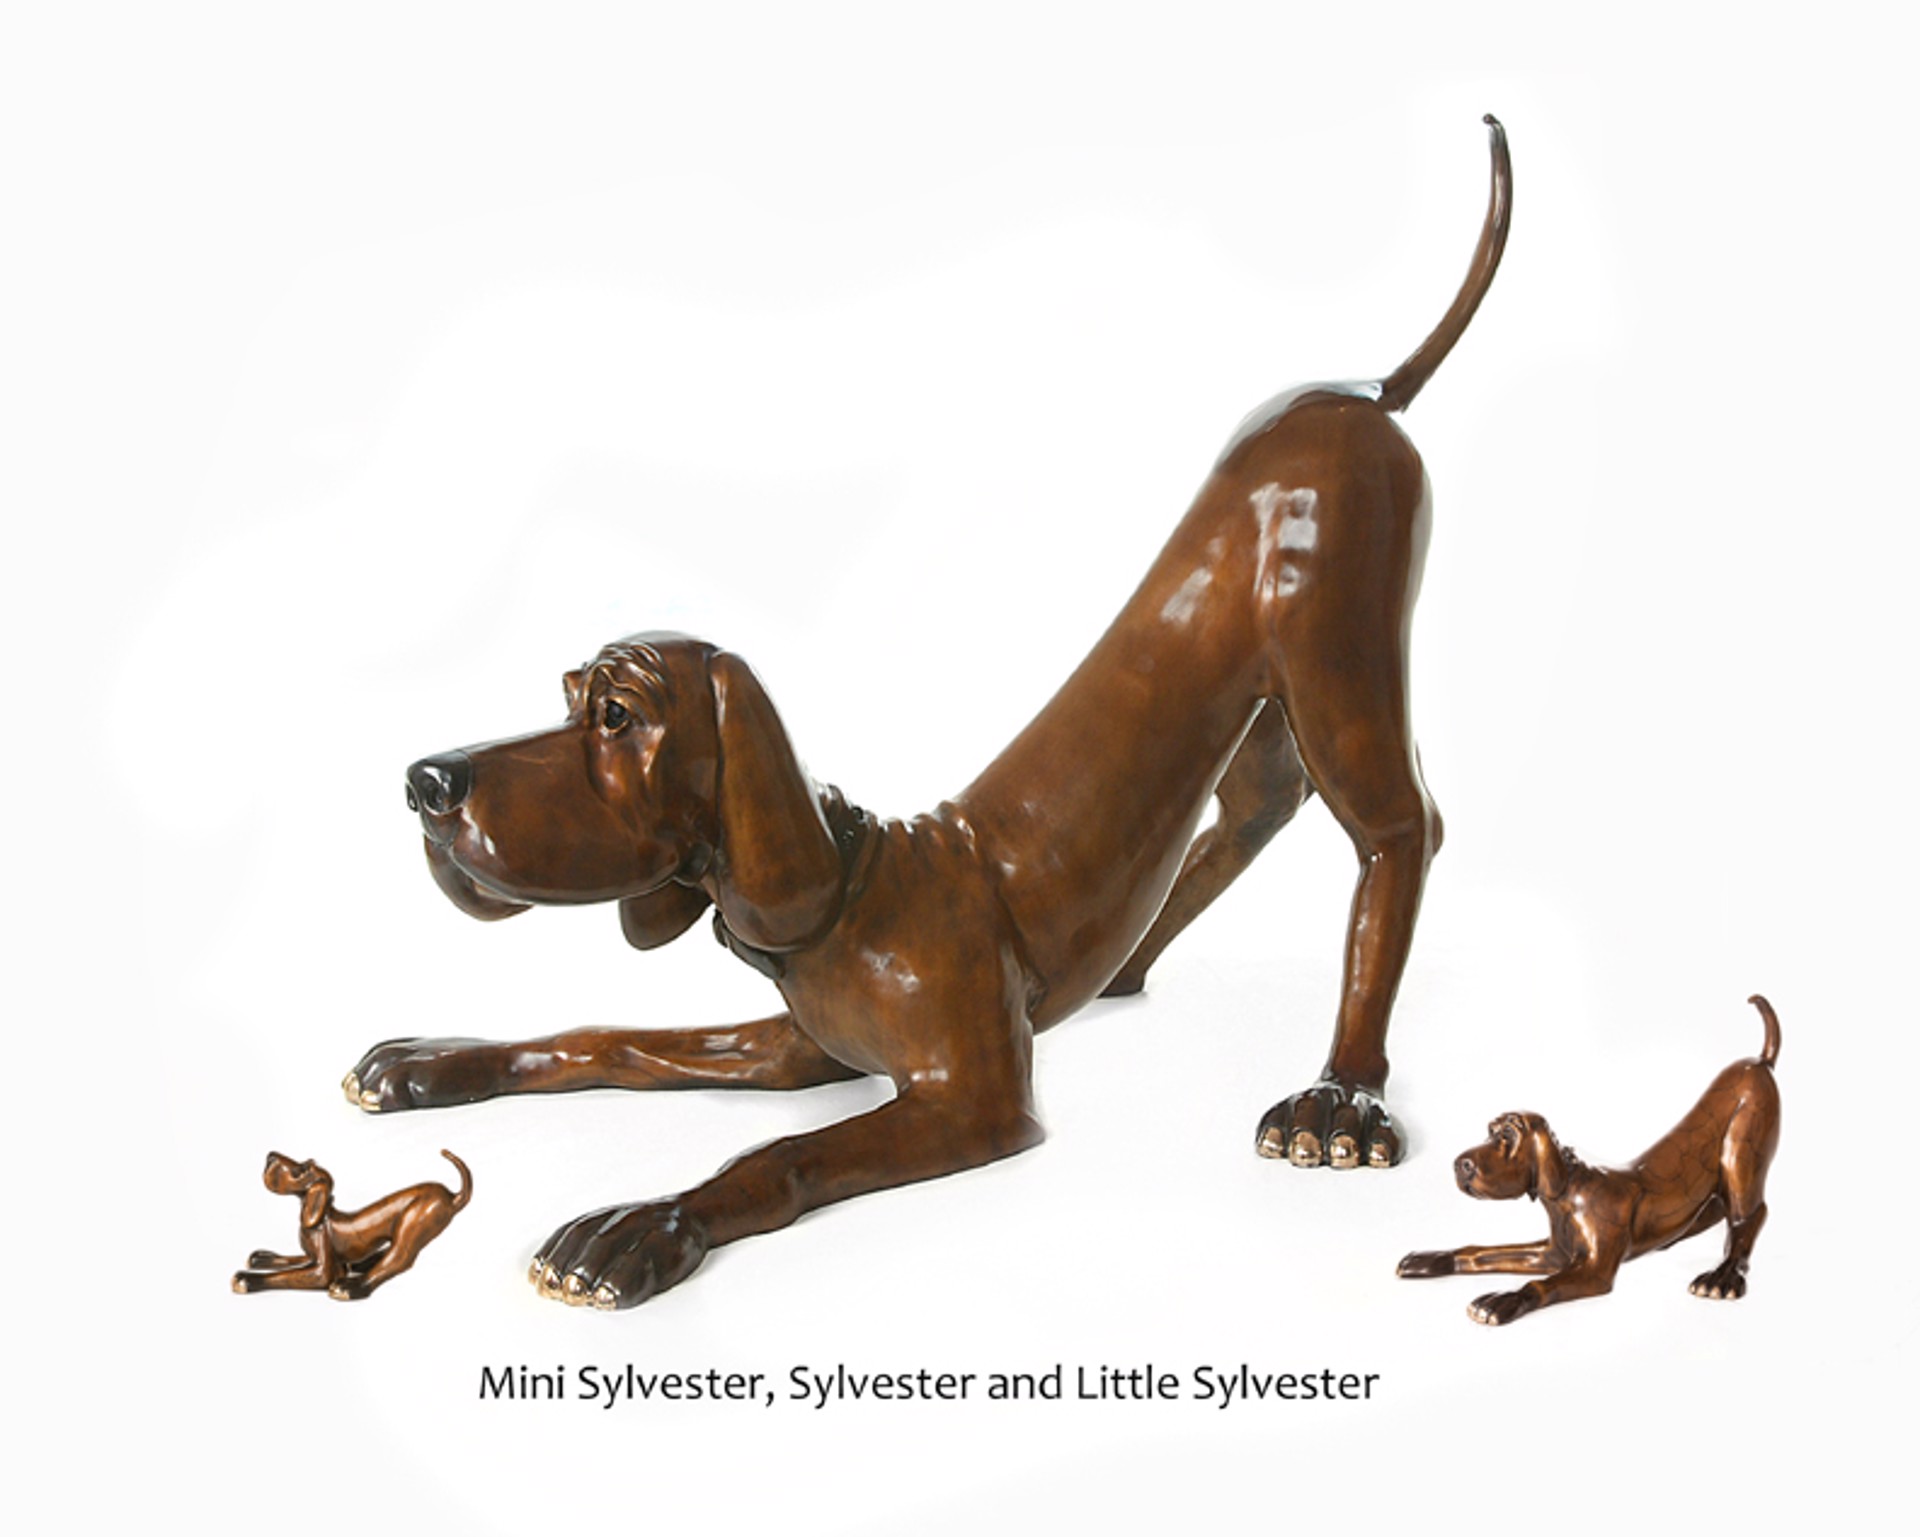 3 sylvester large, little and mini by Marty Goldstein